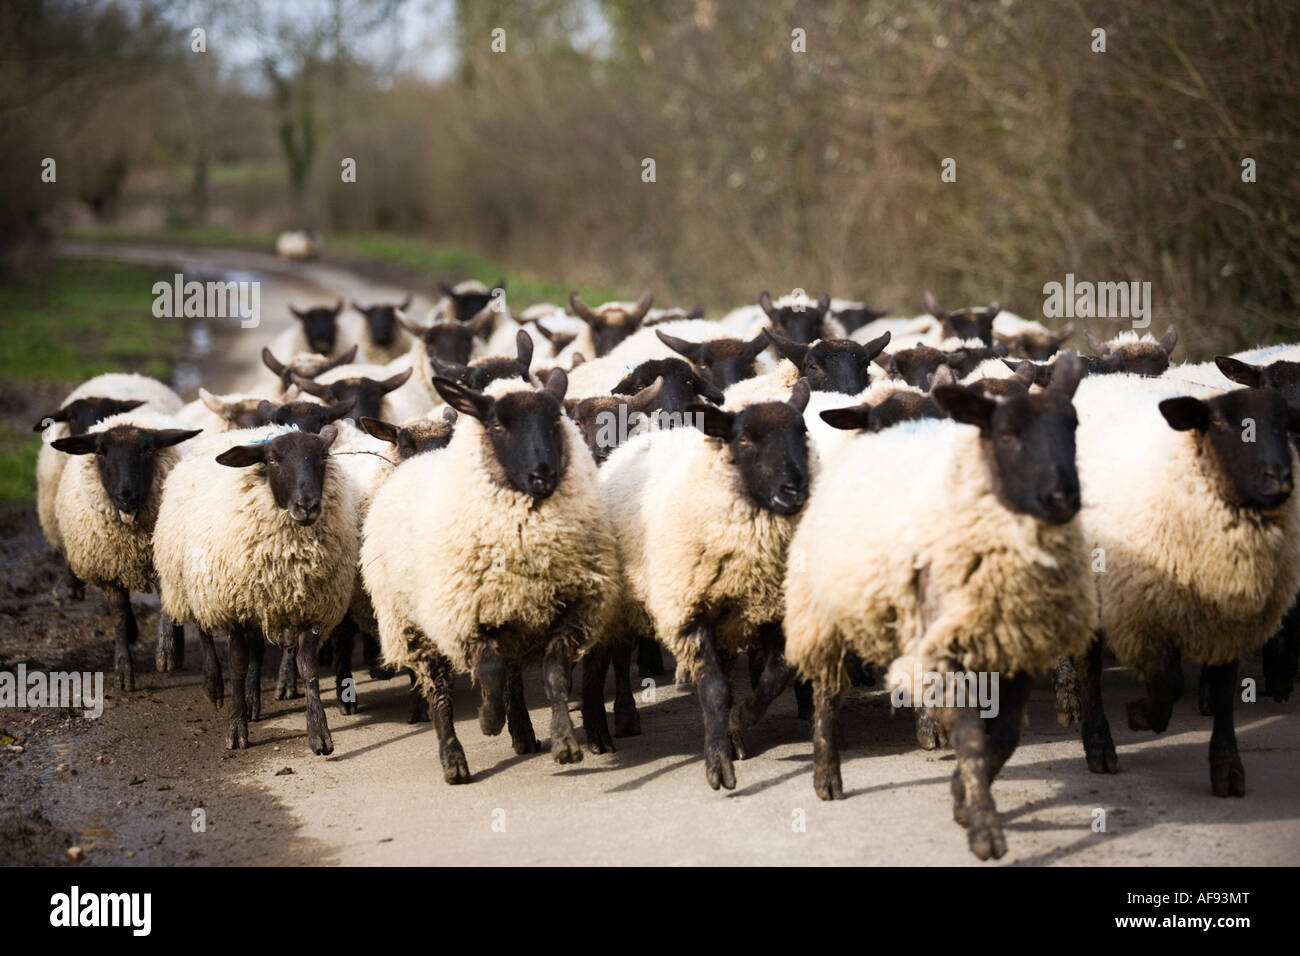 A flock of black-faced sheep running down a country road in the Cotswolds, Oxfordshire, UK Stock Photo